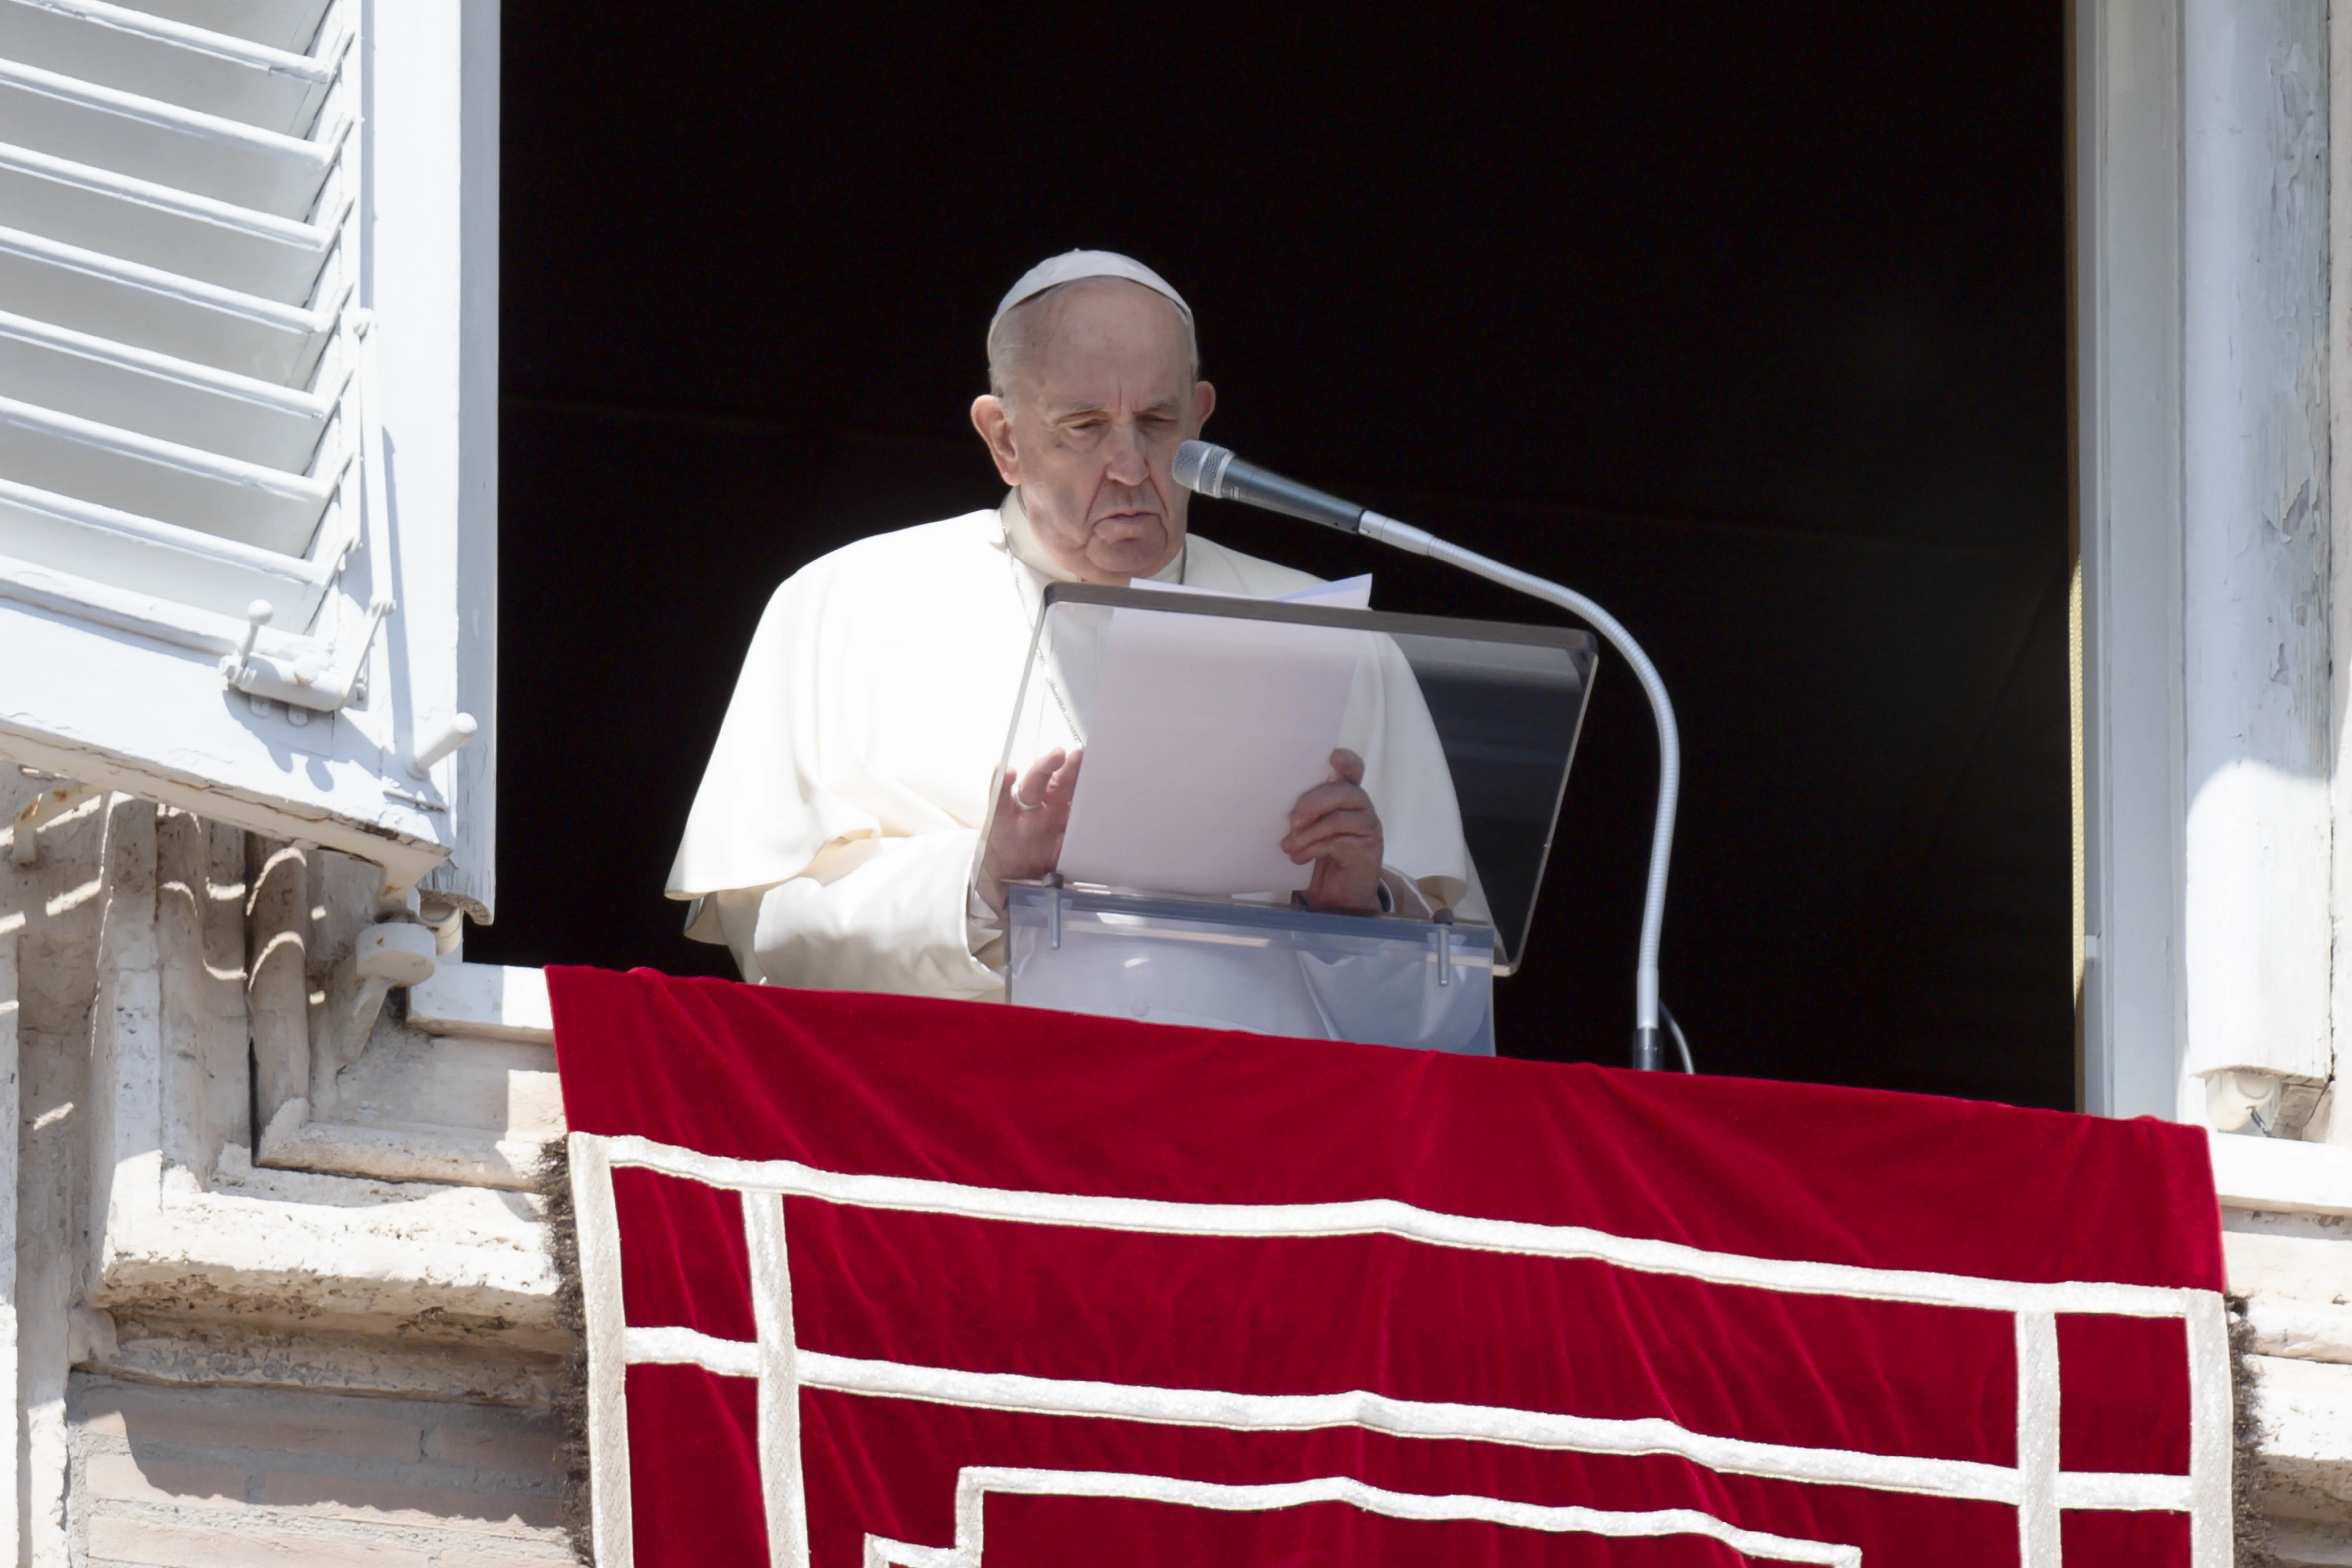 Pope Francis speaks at the Angelus address on March 20, 2022.?w=200&h=150